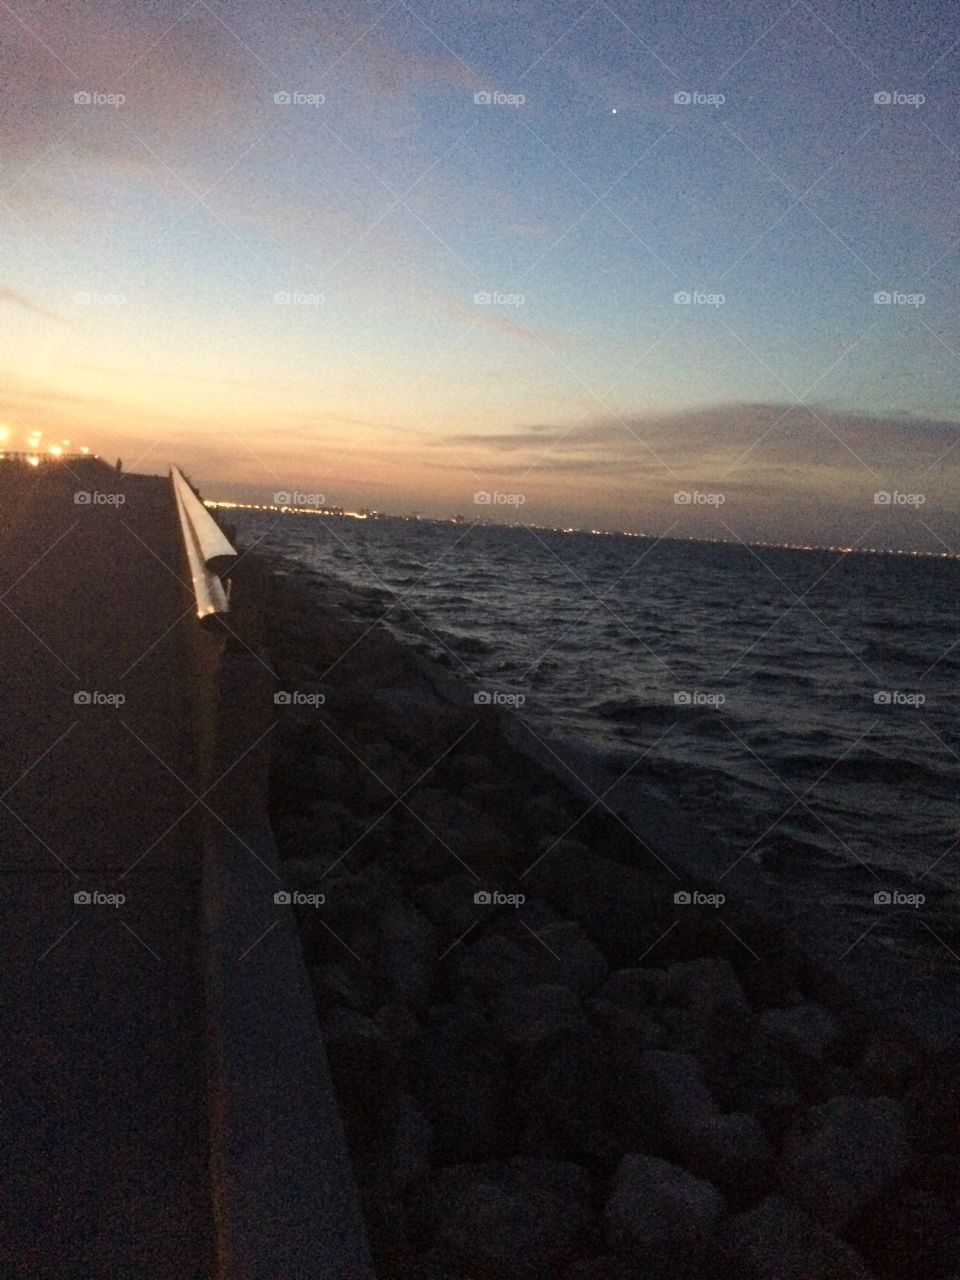 Nothing like a morning workout by the ocean on the causeway. There’s some motivation when you get up dark and early and see this. 